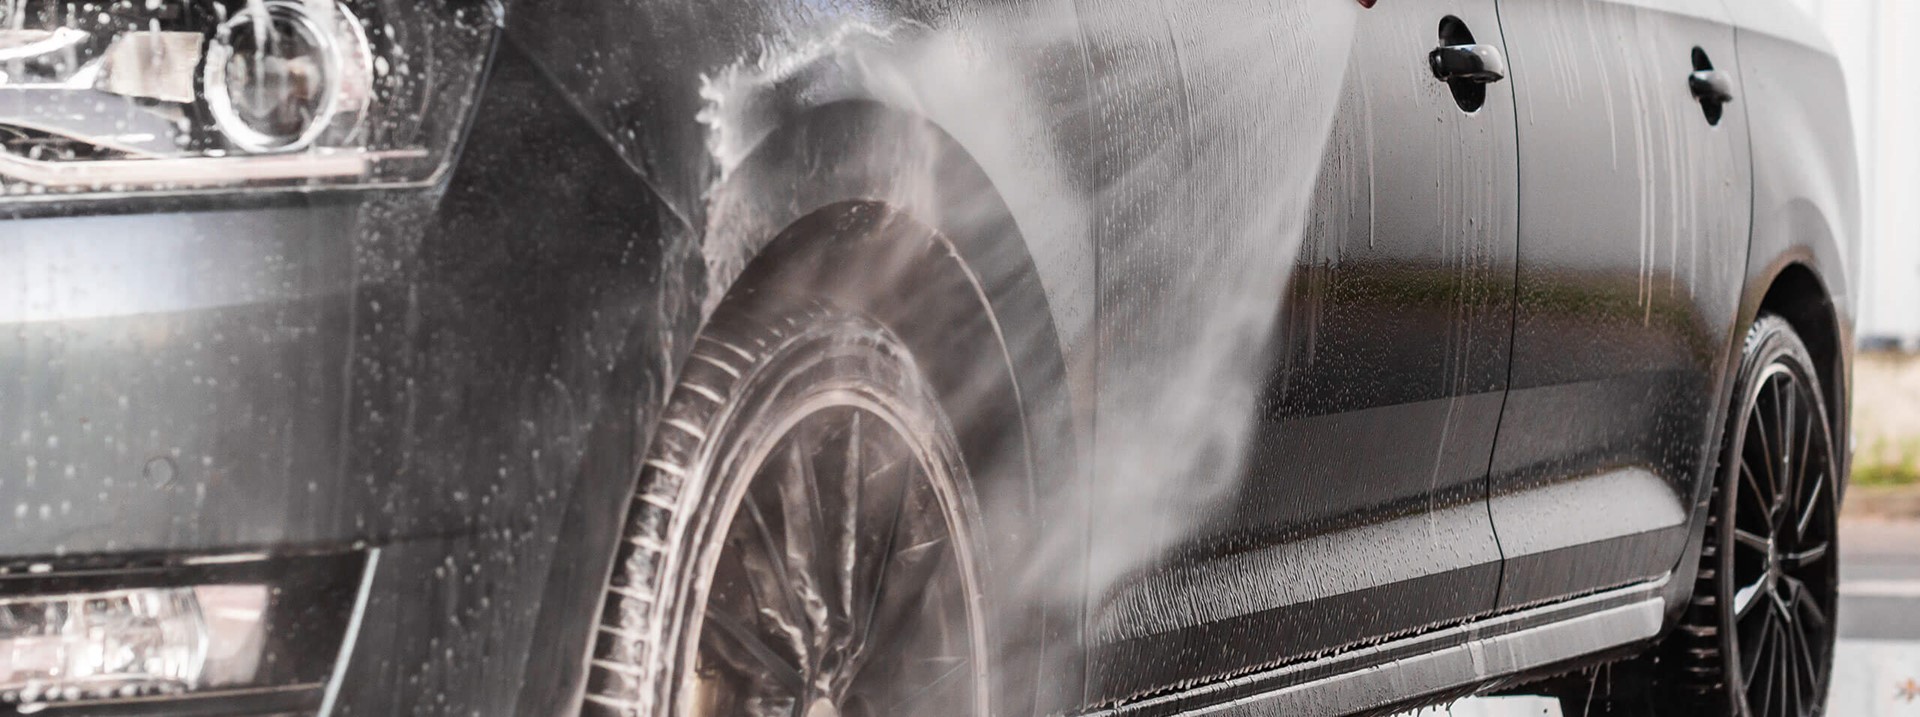 Pumps for car wash systems